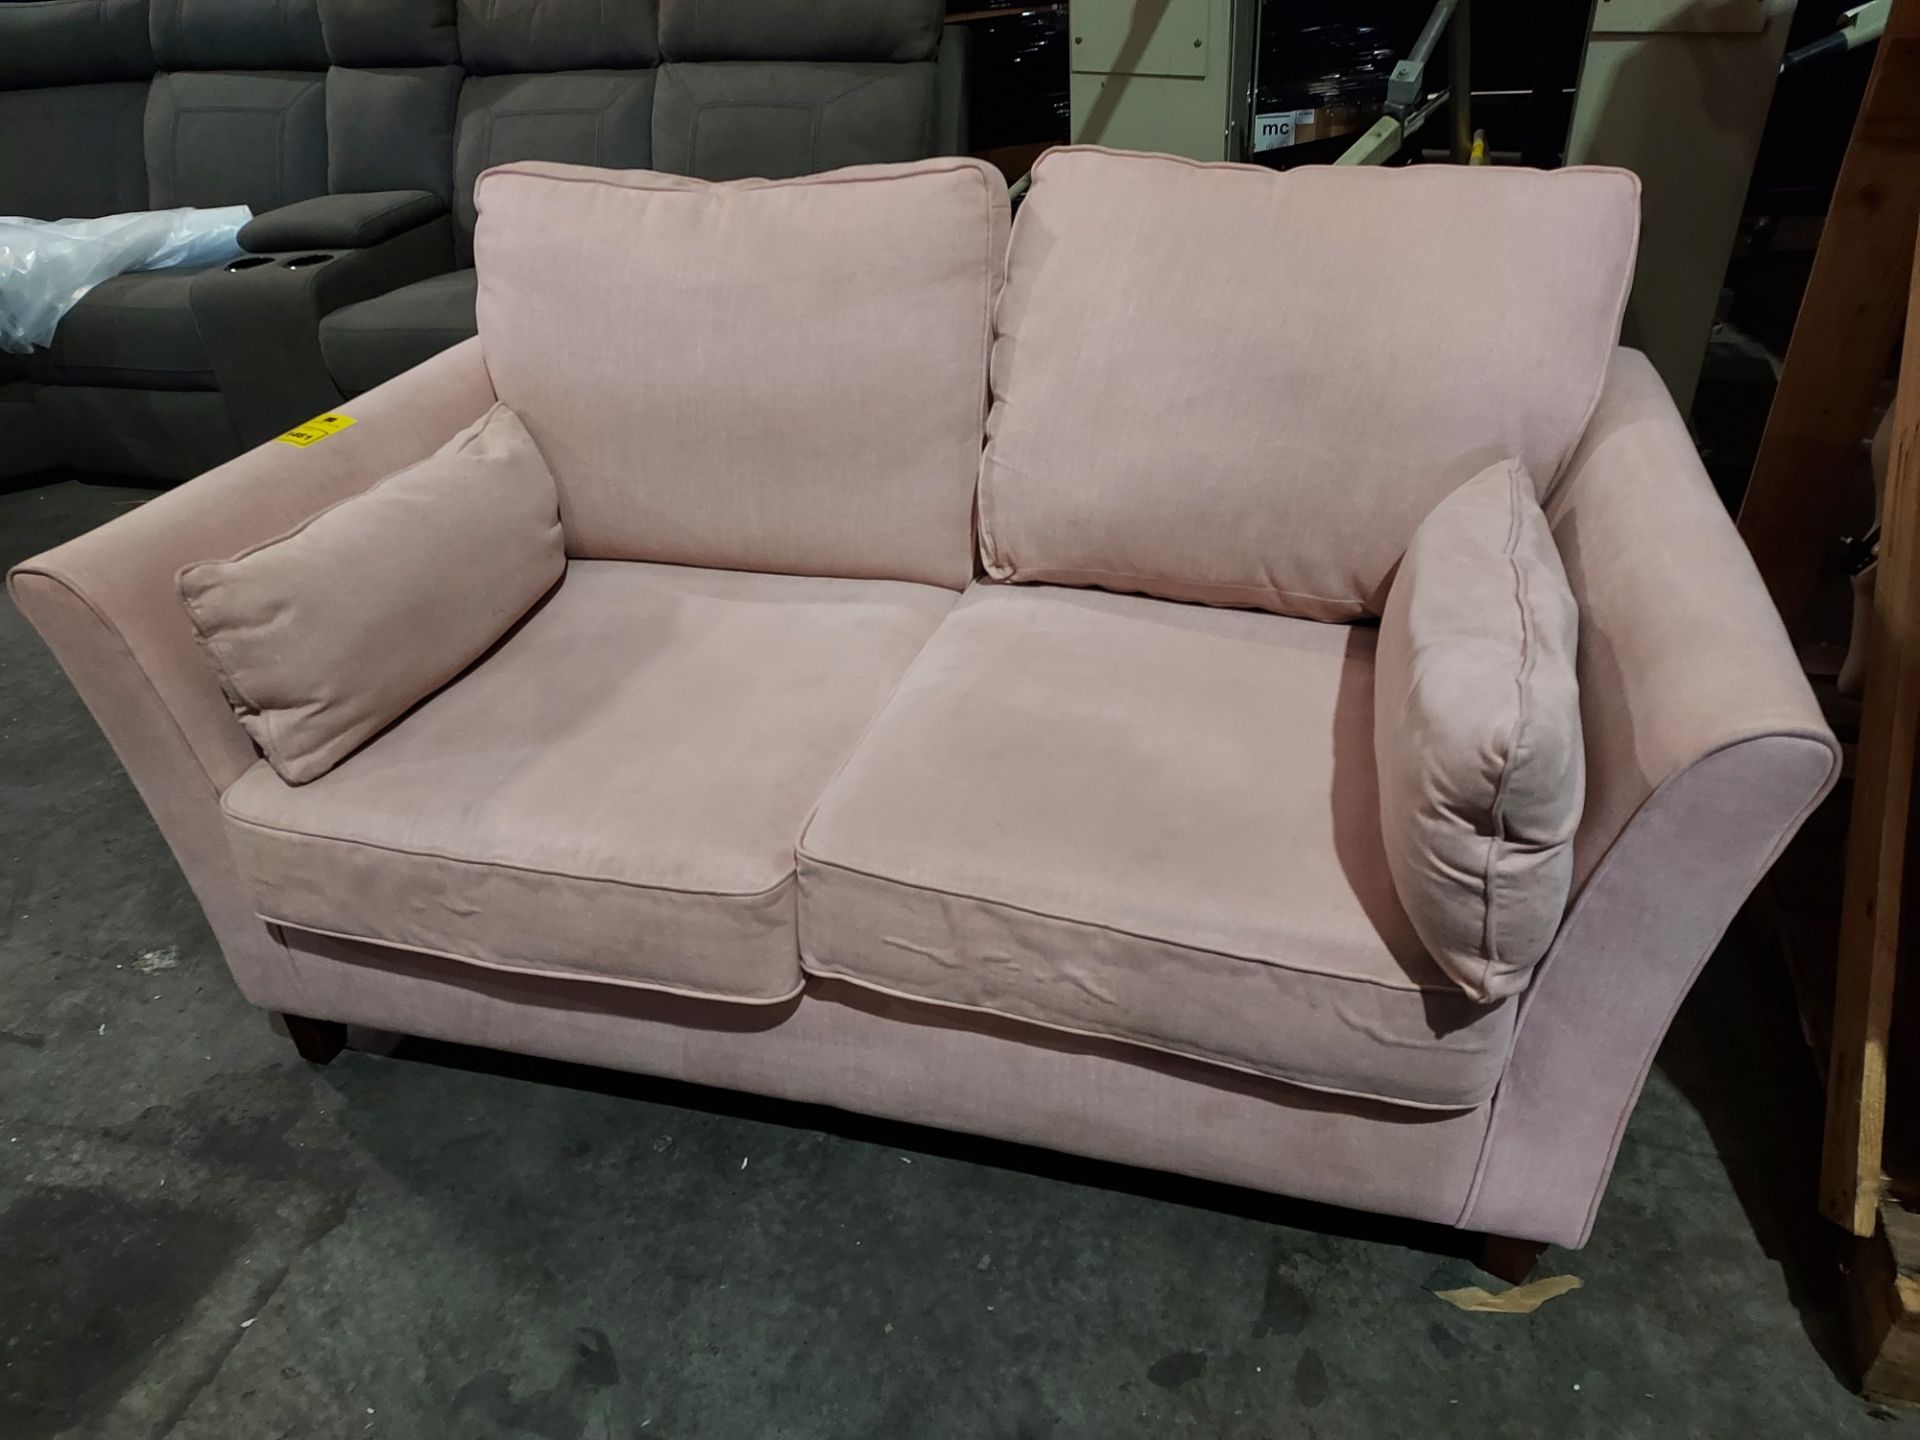 1 X TWO SEATER SOFA IN PINK (USED)